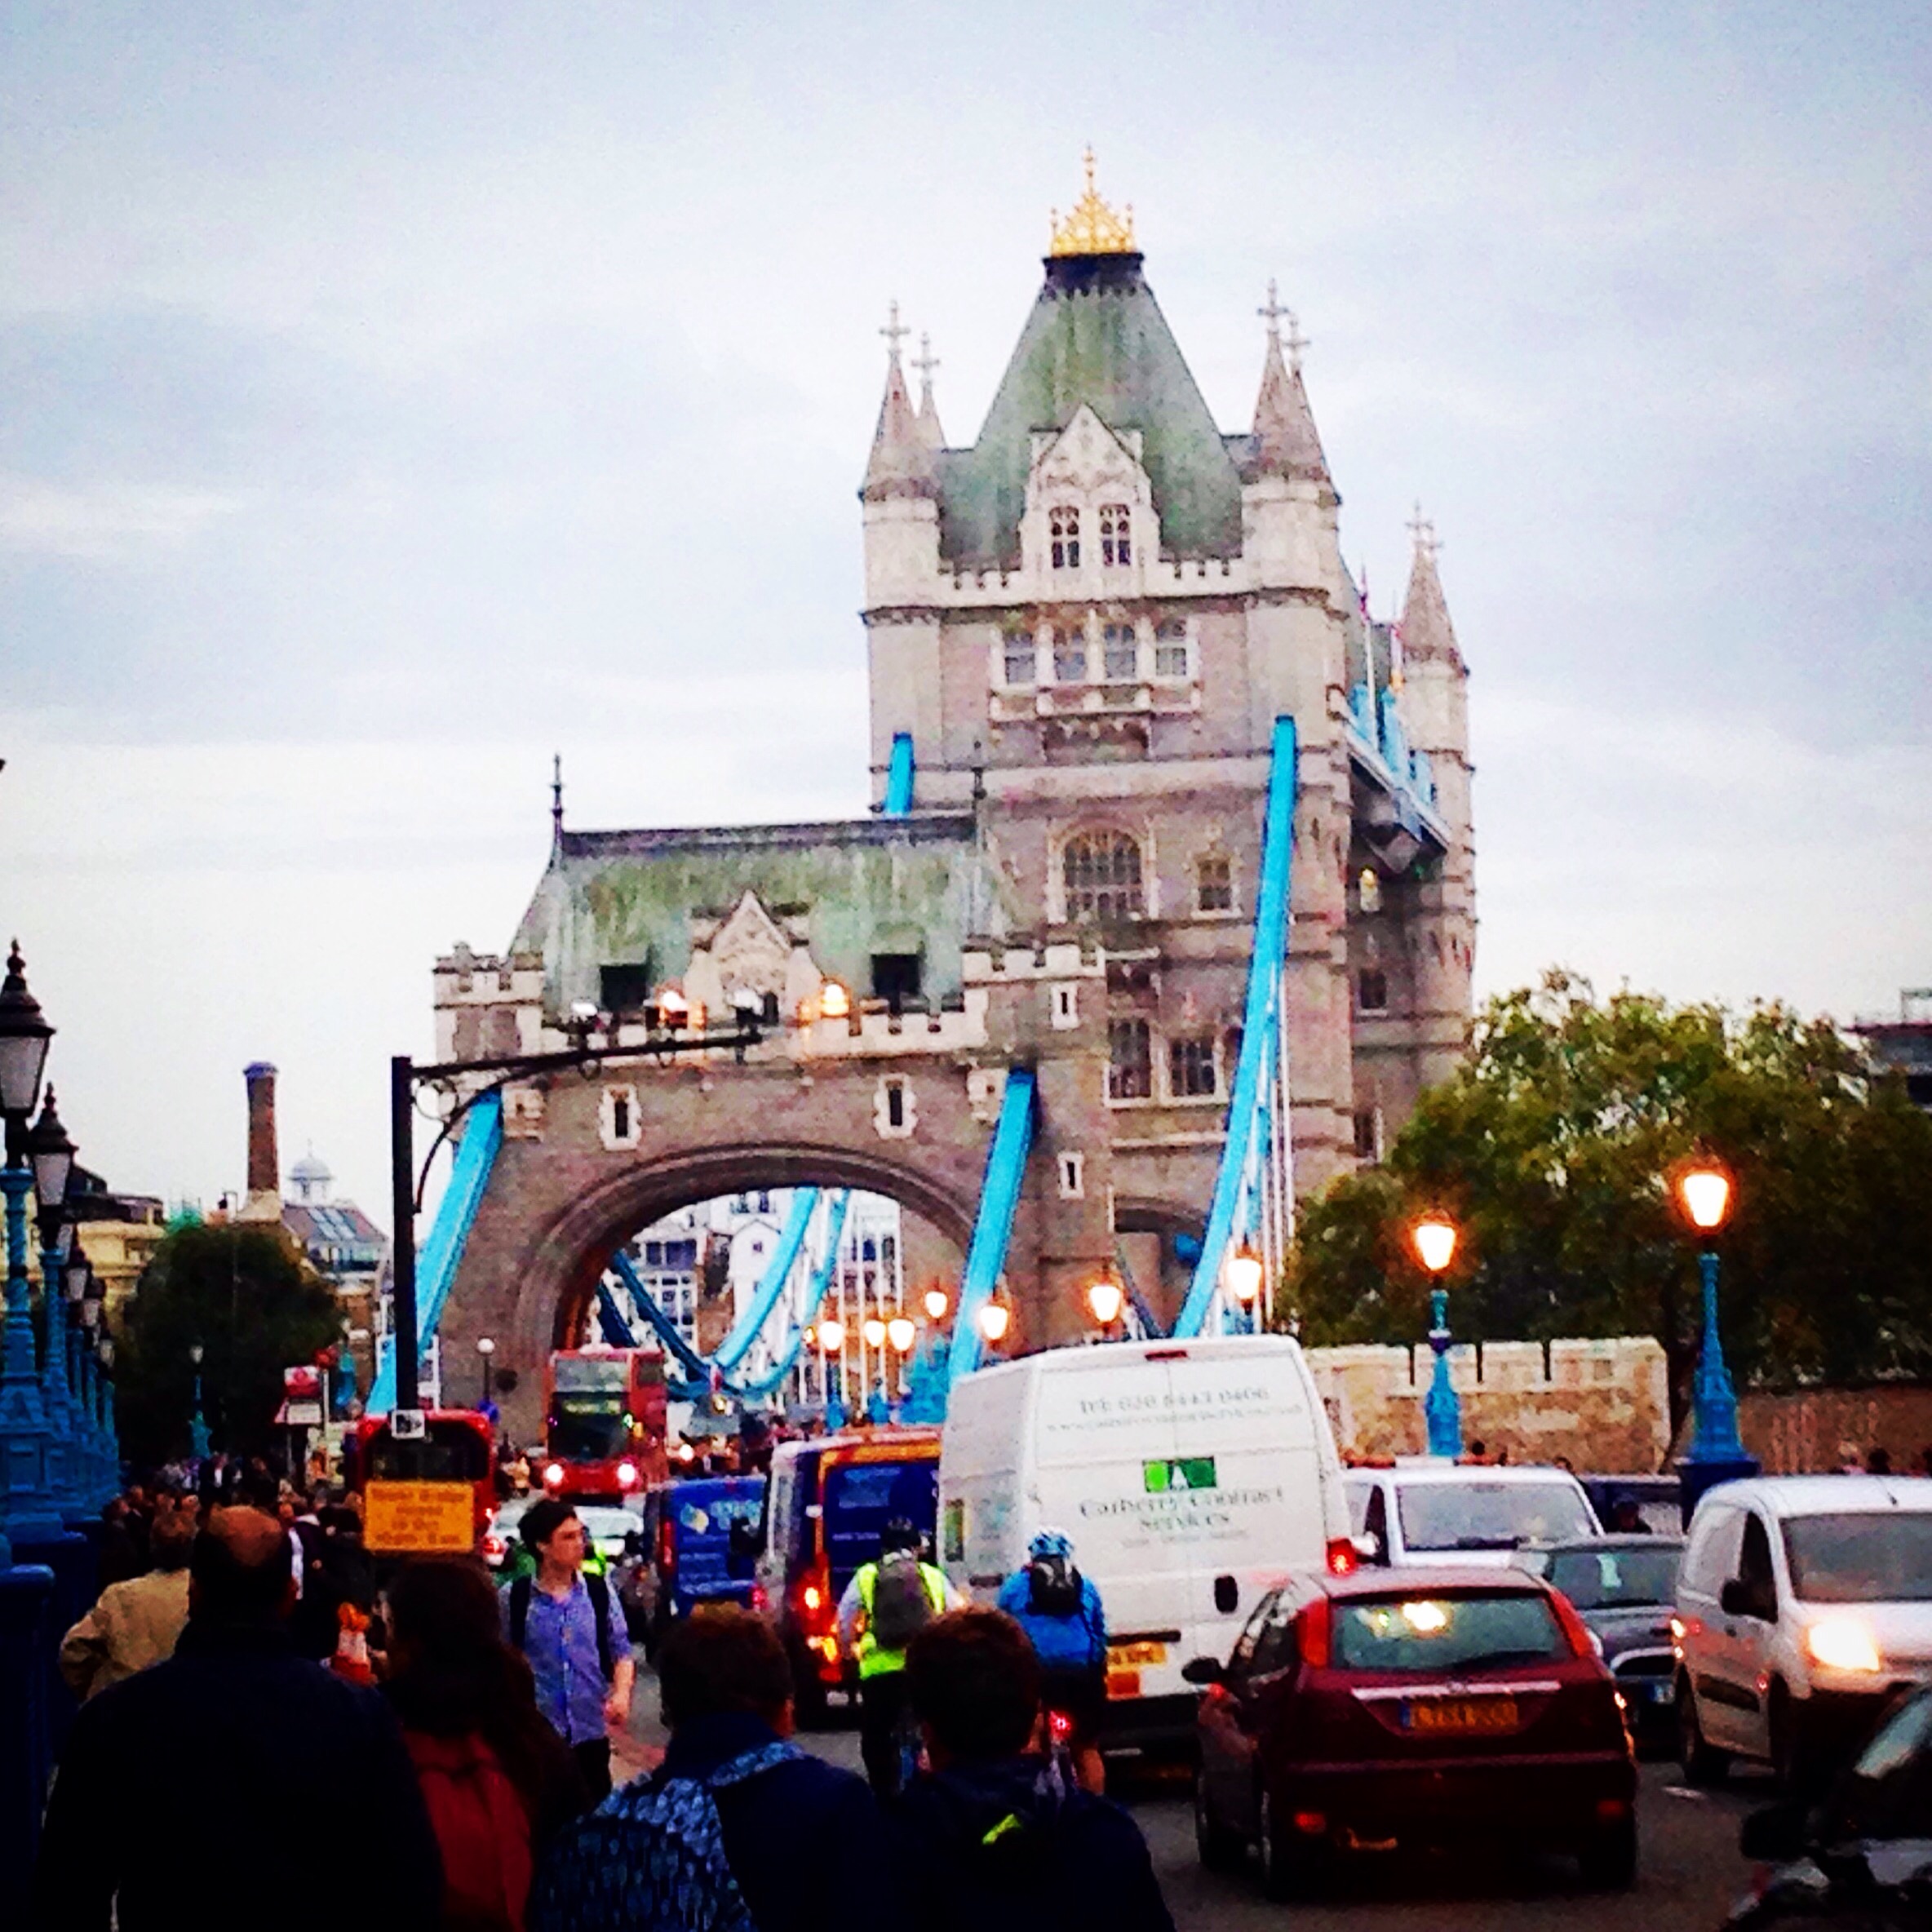 Busy road over Tower Bridge in London